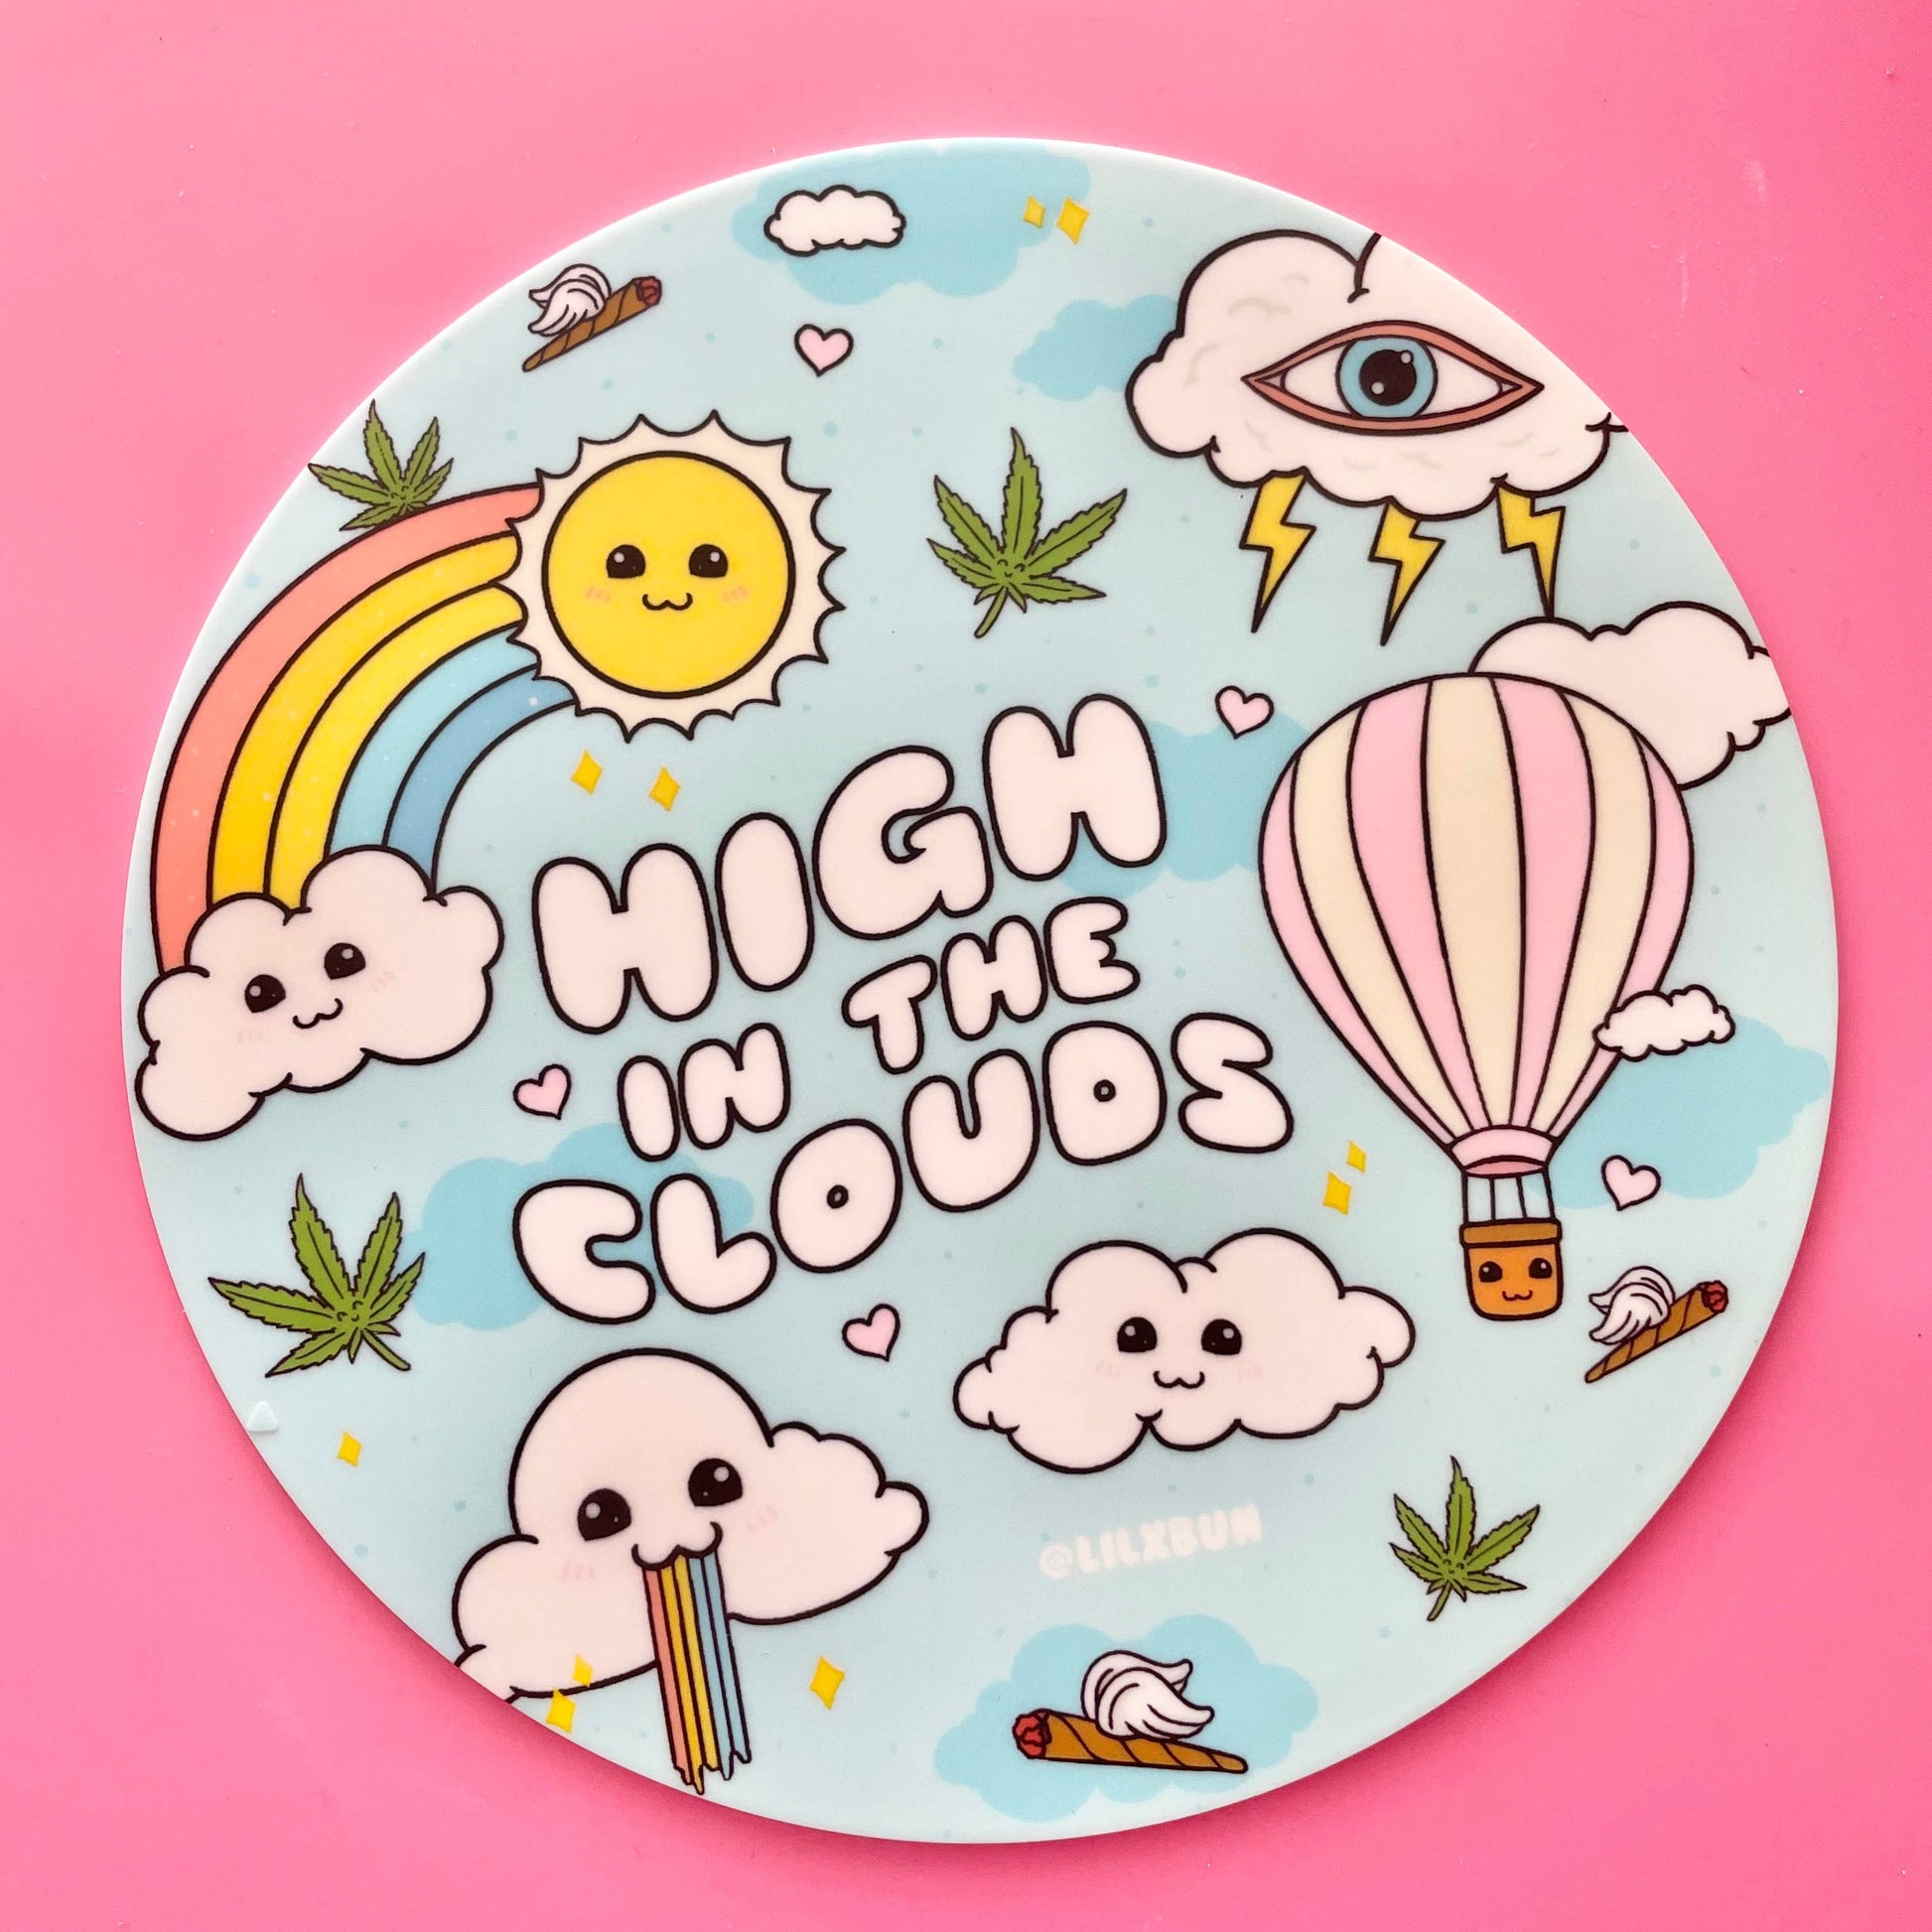 lilxbun - High in Clouds Dab Mat yoga smokes yoga studio, delivery, delivery near me, yoga smokes smoke shop, find smoke shop, head shop near me, yoga studio, headshop, head shop, local smoke shop, psl, psl smoke shop, smoke shop, smokeshop, yoga, yoga studio, dispensary, local dispensary, smokeshop near me, port saint lucie, florida, port st lucie, lounge, life, highlife, love, stoned, highsociety. Yoga Smokes High in Clouds Dab Mat